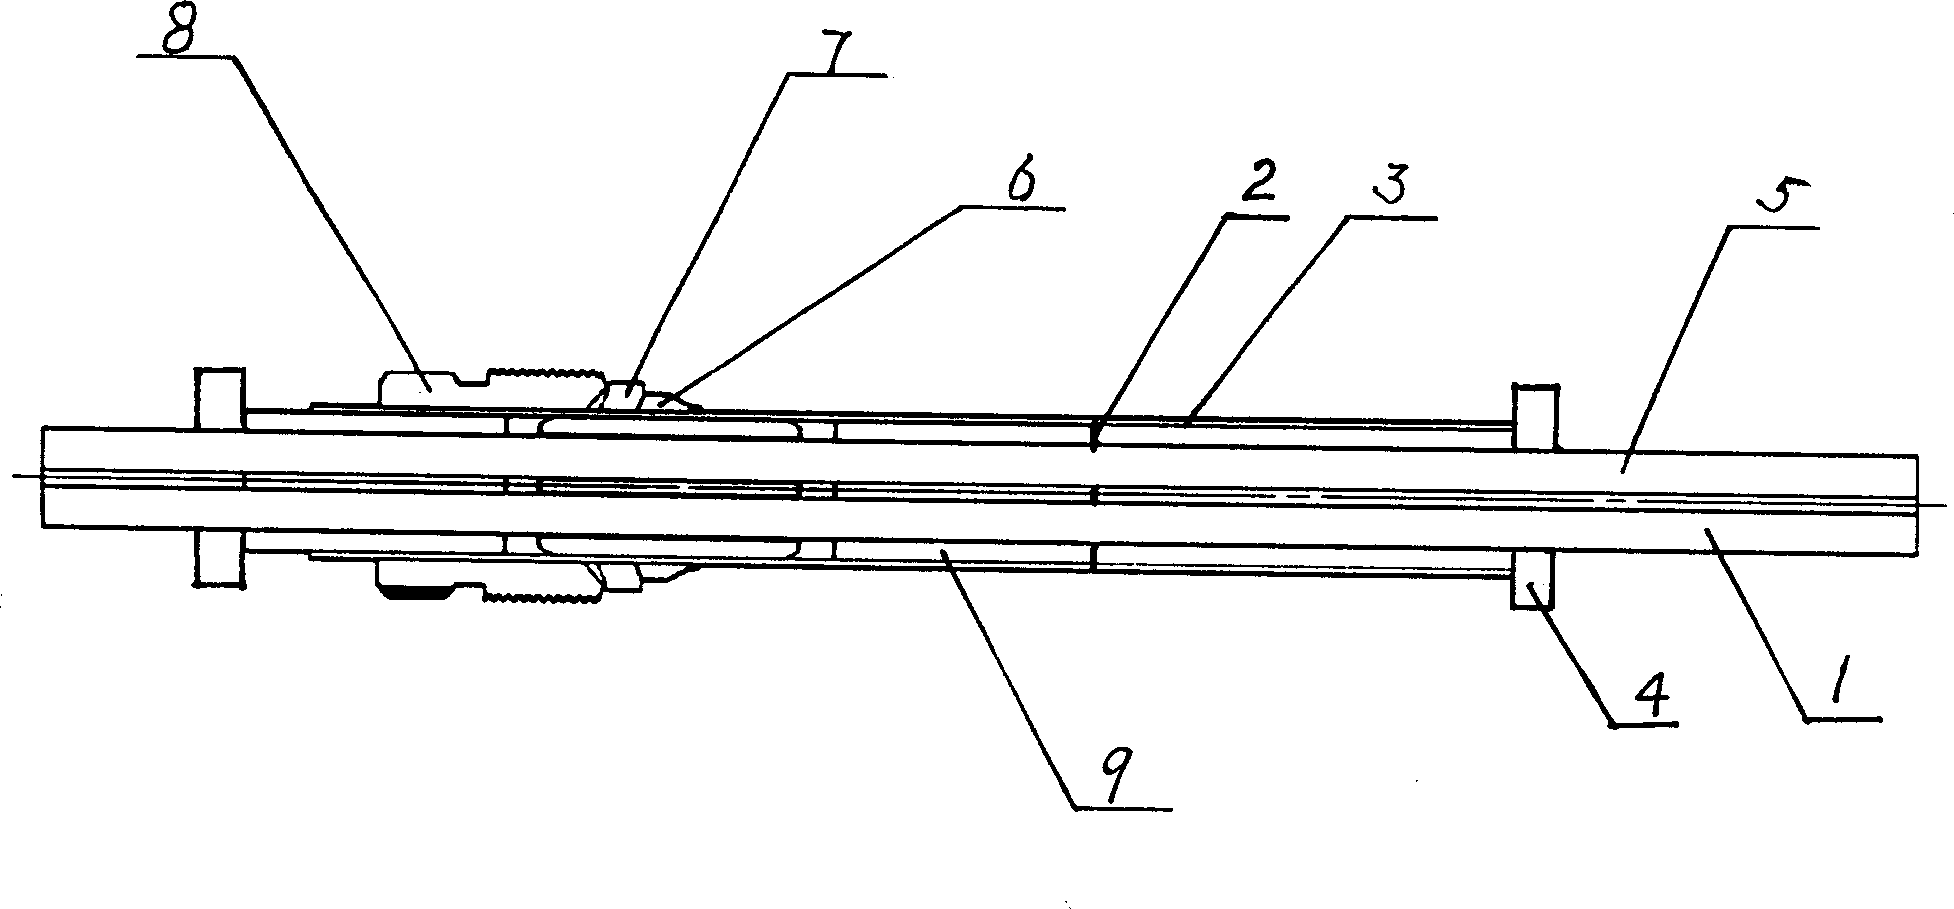 A radial compression applied sealing member processing method